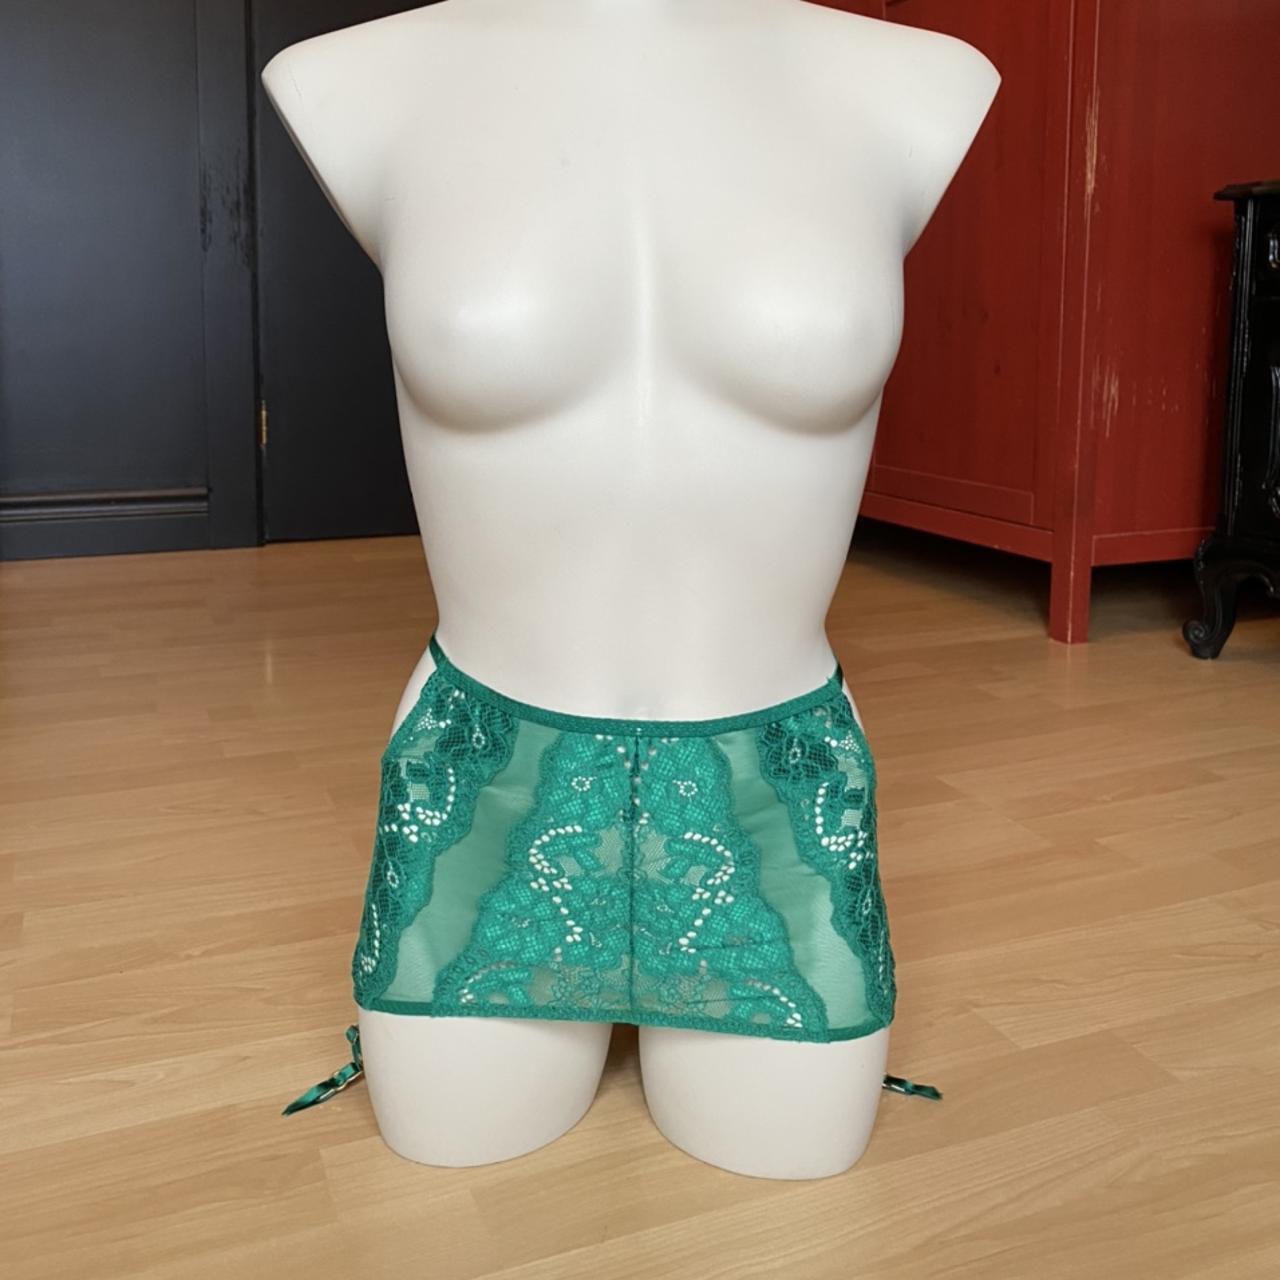 Super sexy Green lingerie skirt from La Senza. Size